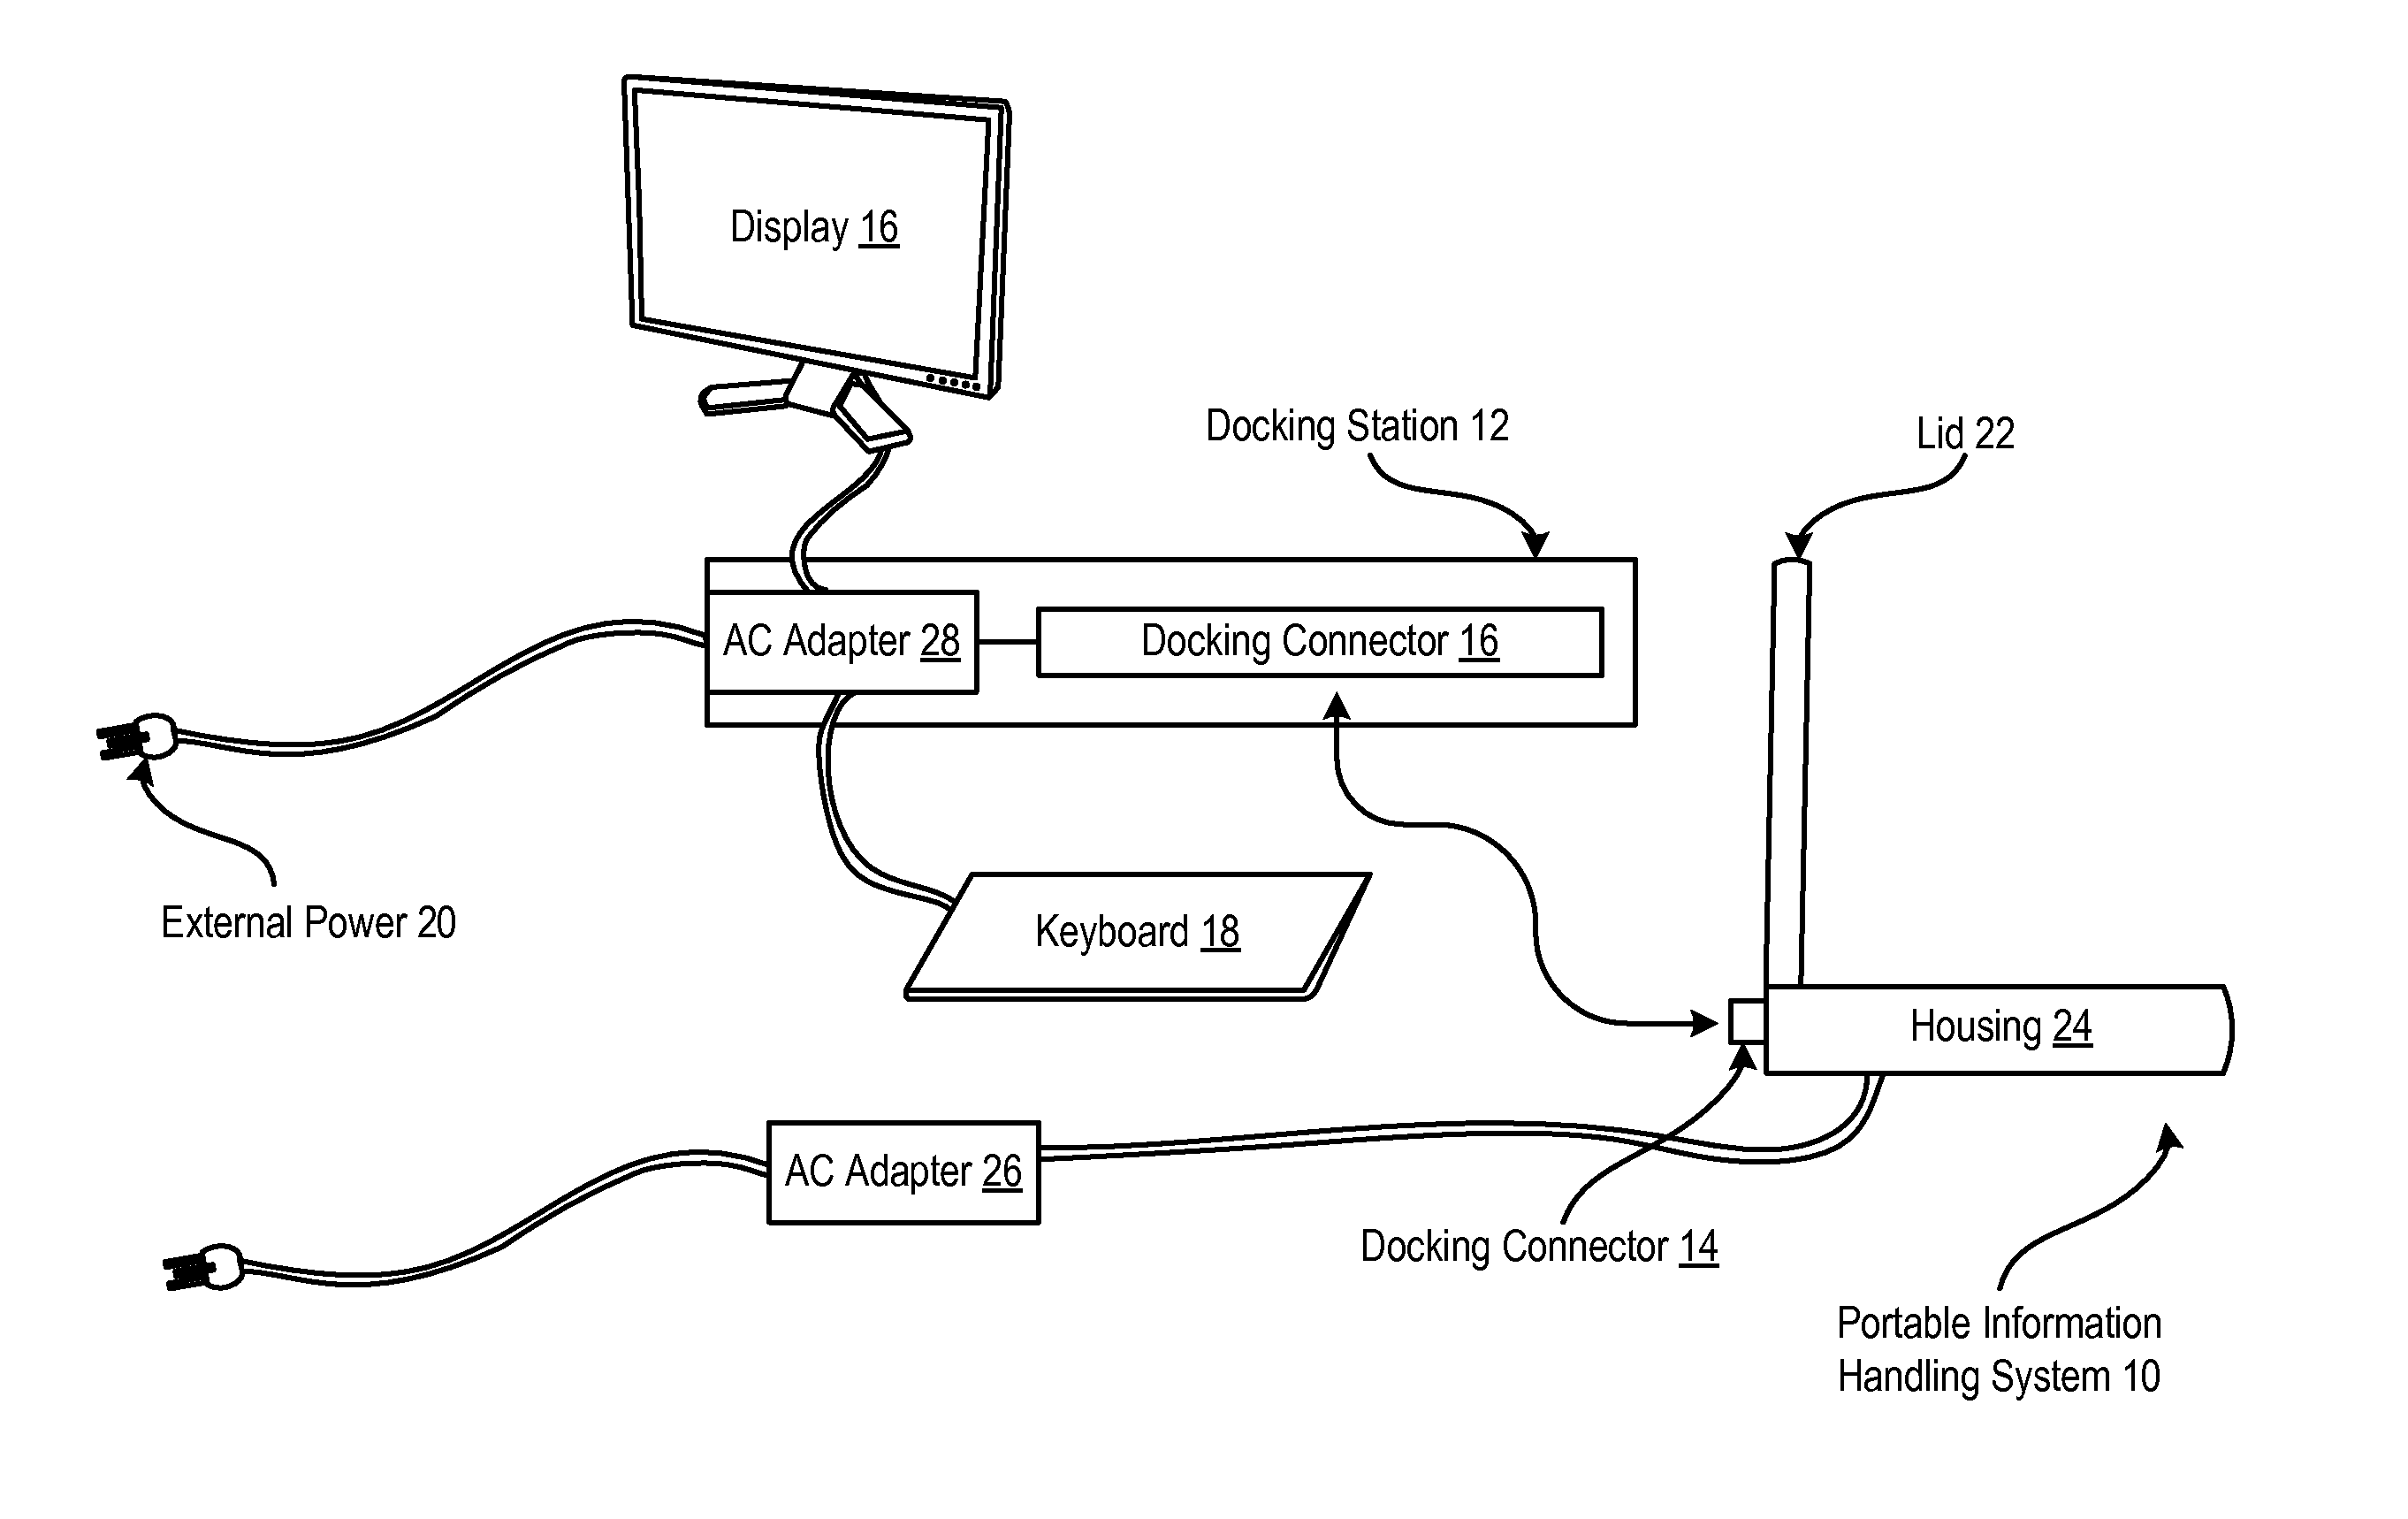 System and Method for Powering Docked Portable Information Handling System